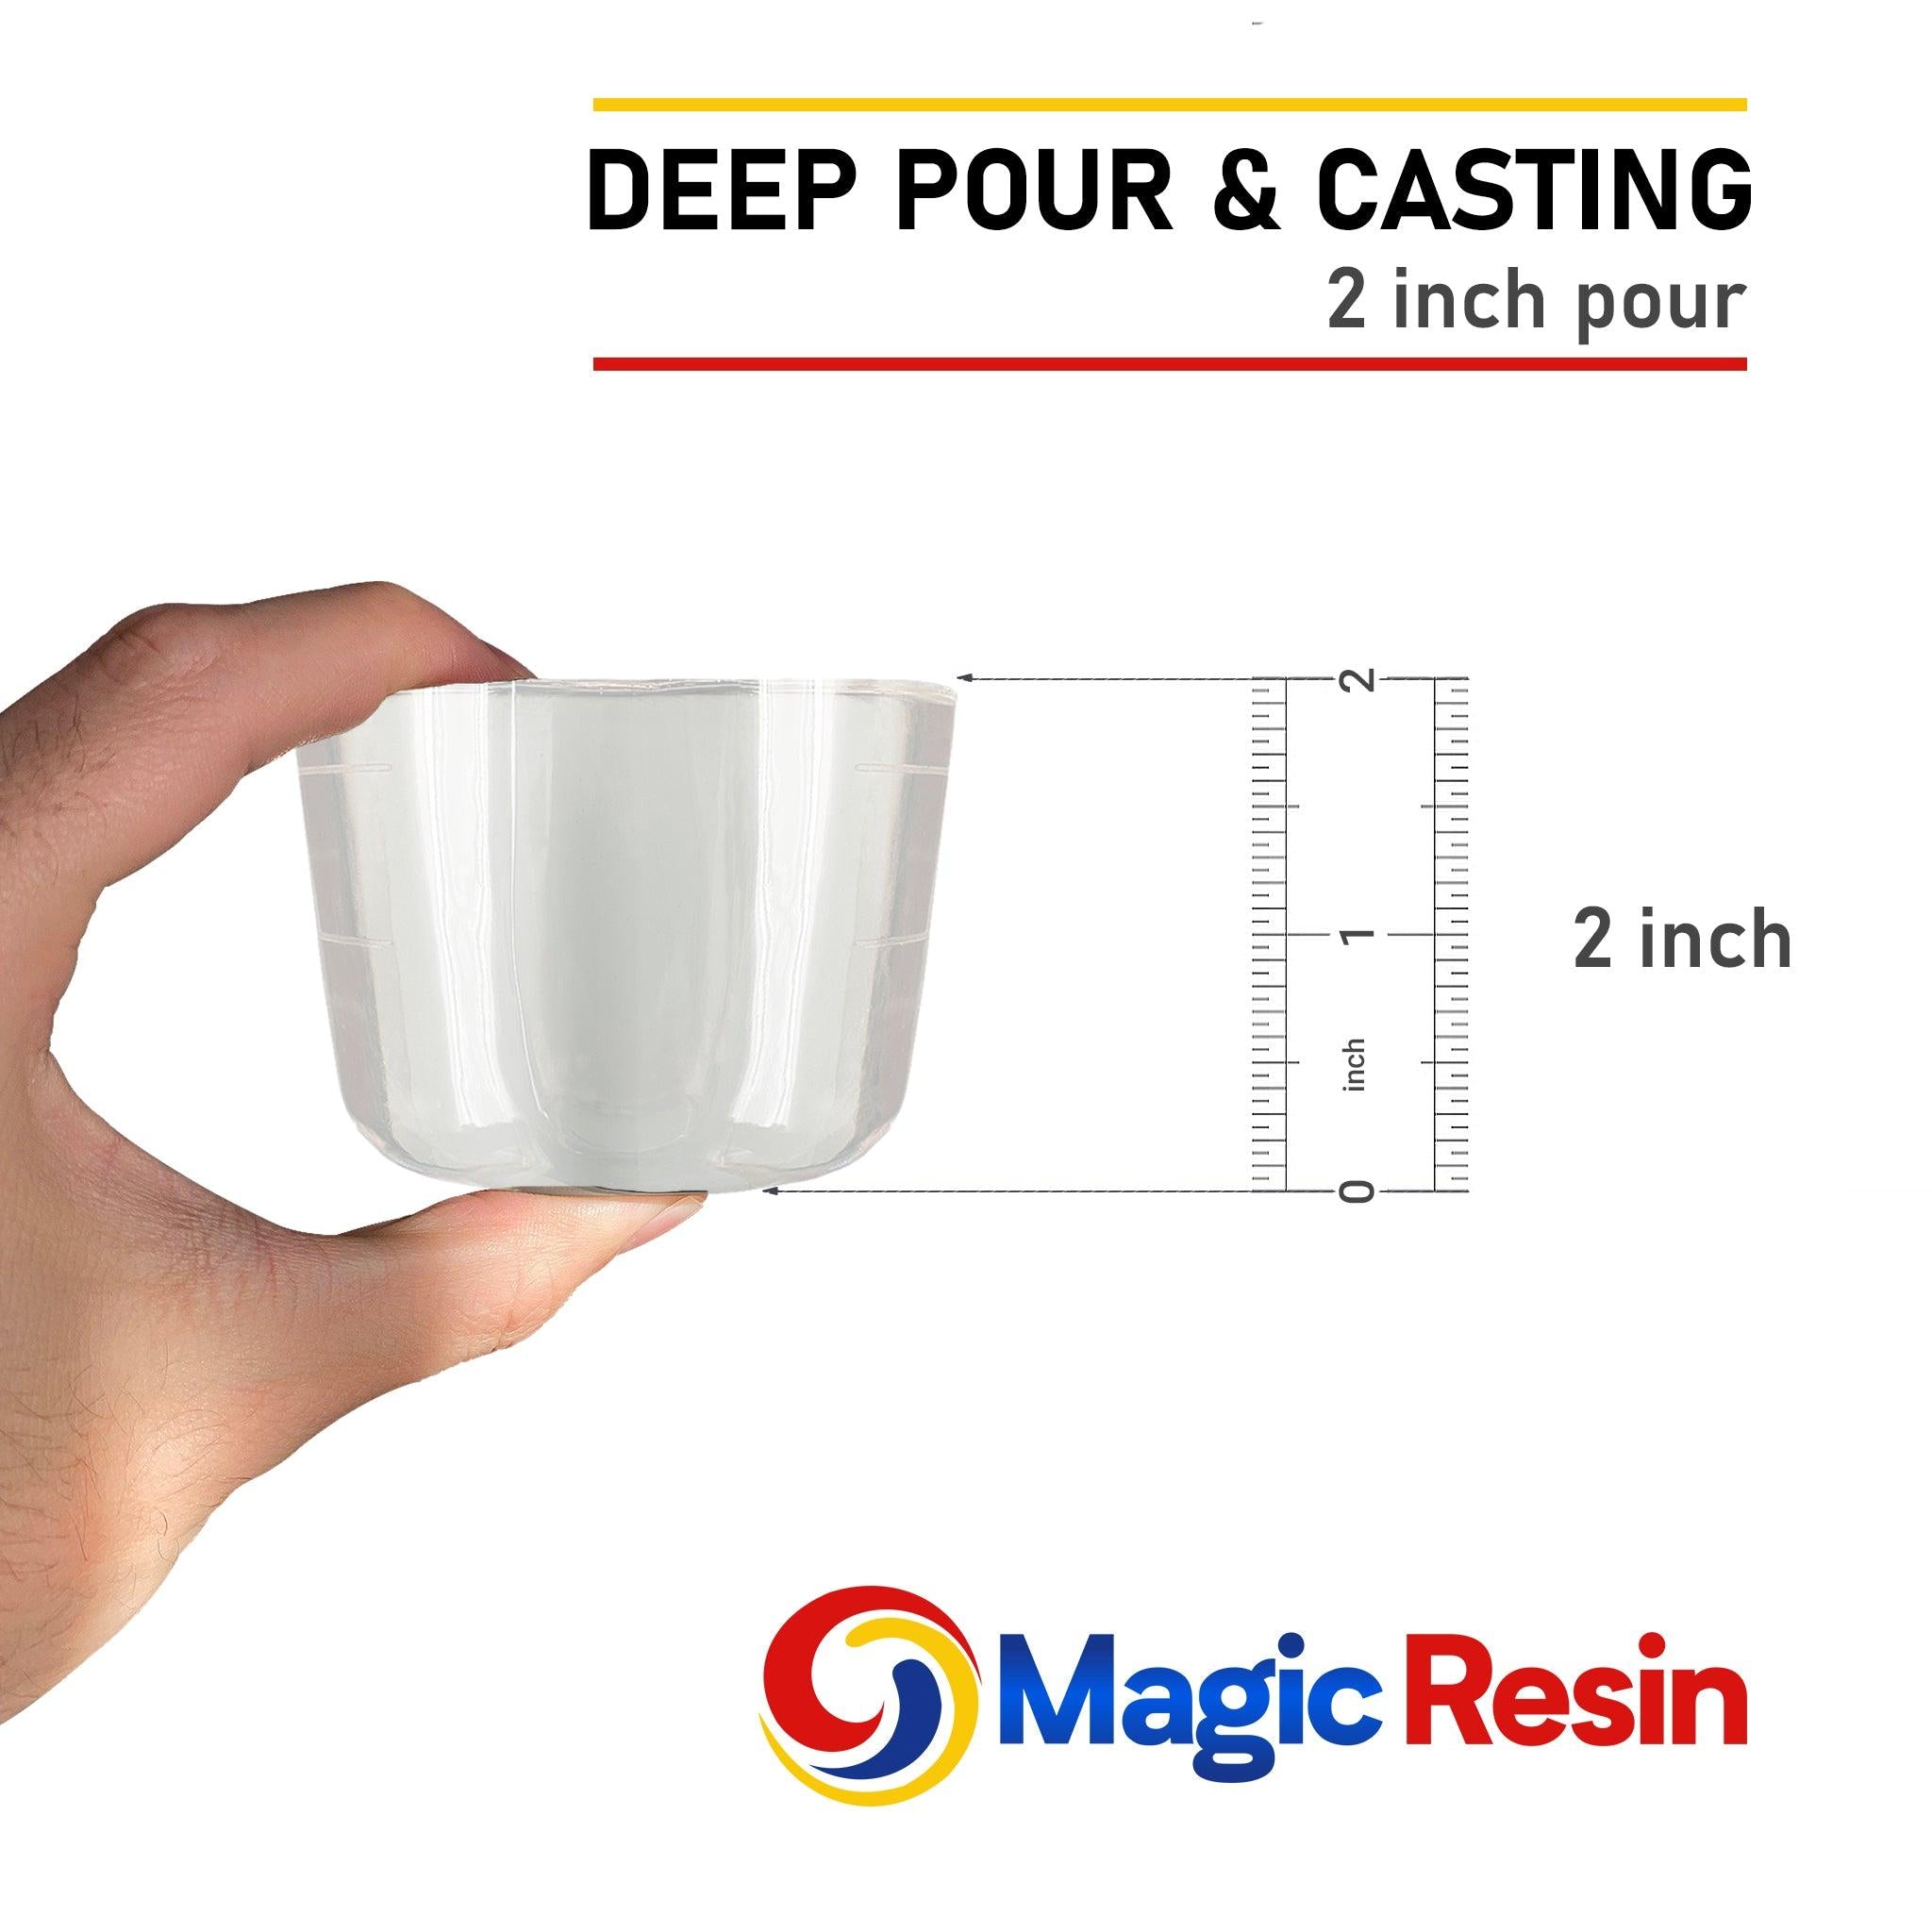 Epoxy Resin for River Table - 0.75 Gallon Kit - UV Resistant Crystal Clear  Epoxy Resin Kit - 2:1 Ratio for Deep Pour, Deep Casting Resin, Live Edge